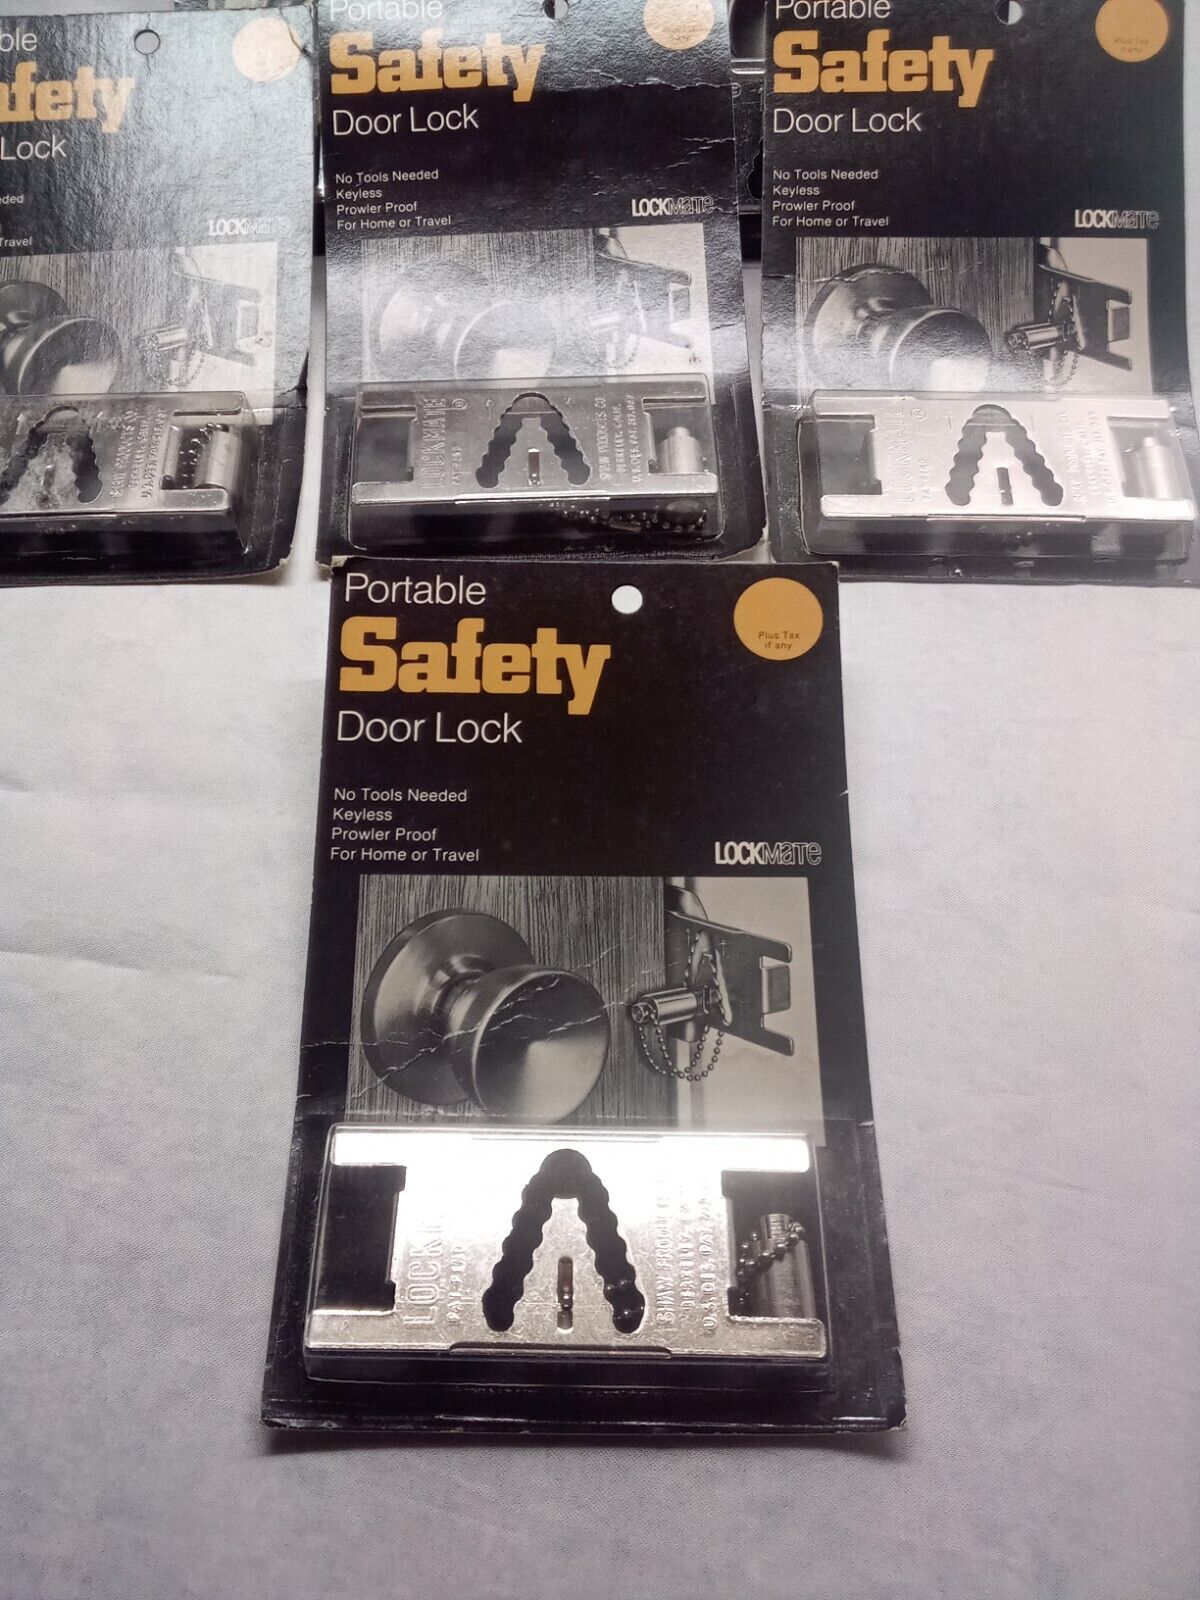 Shaw Products LOCKMATE Portable Safety Door Lock New in Package